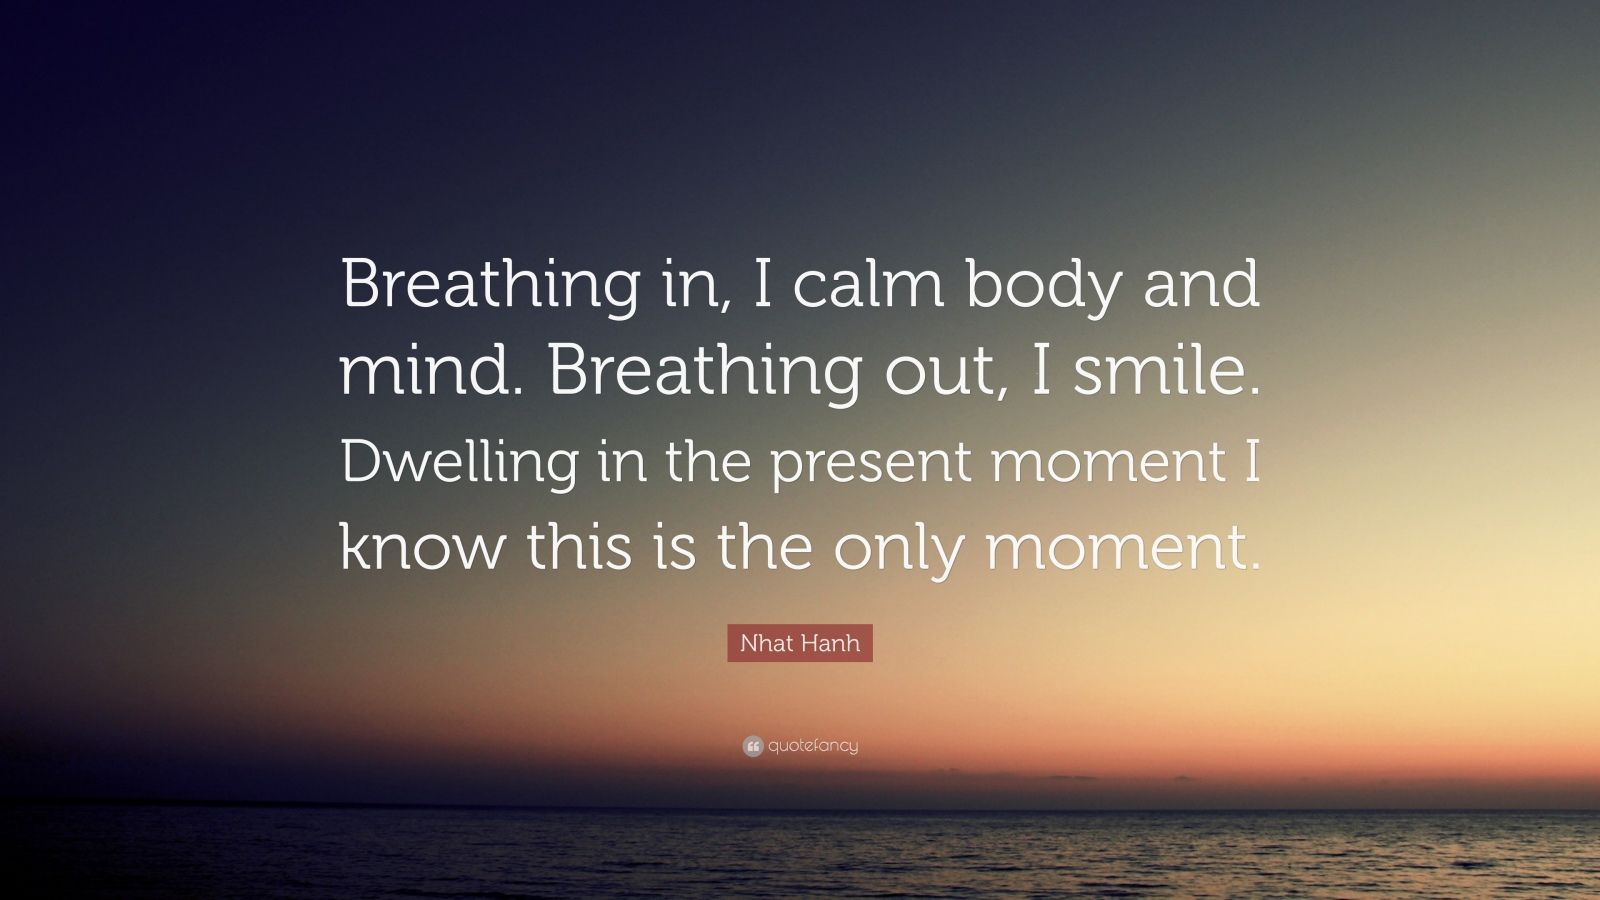 I calm body and mind. Breathing out .quotefancy.com